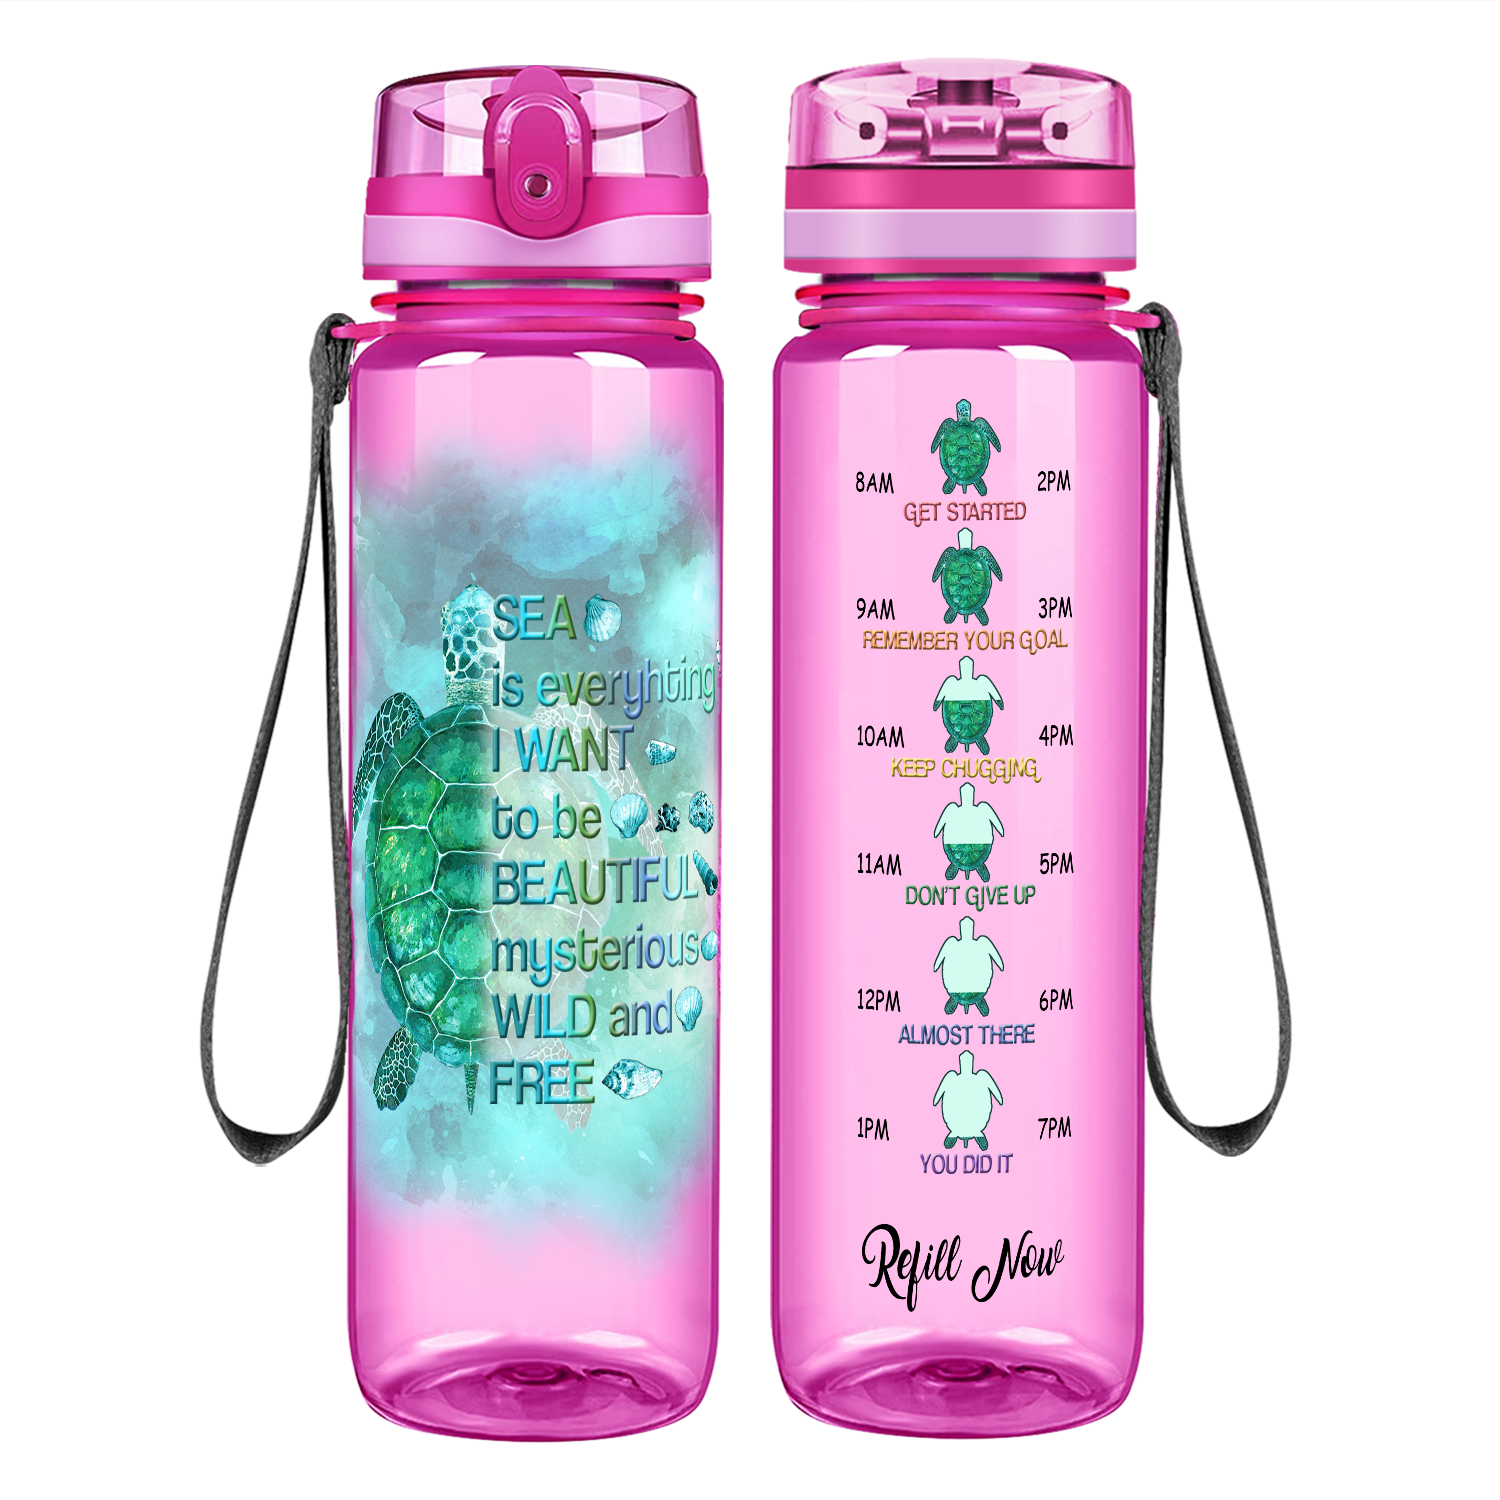 Sea Is Everything I Want on 32 oz Motivational Tracking Water Bottle